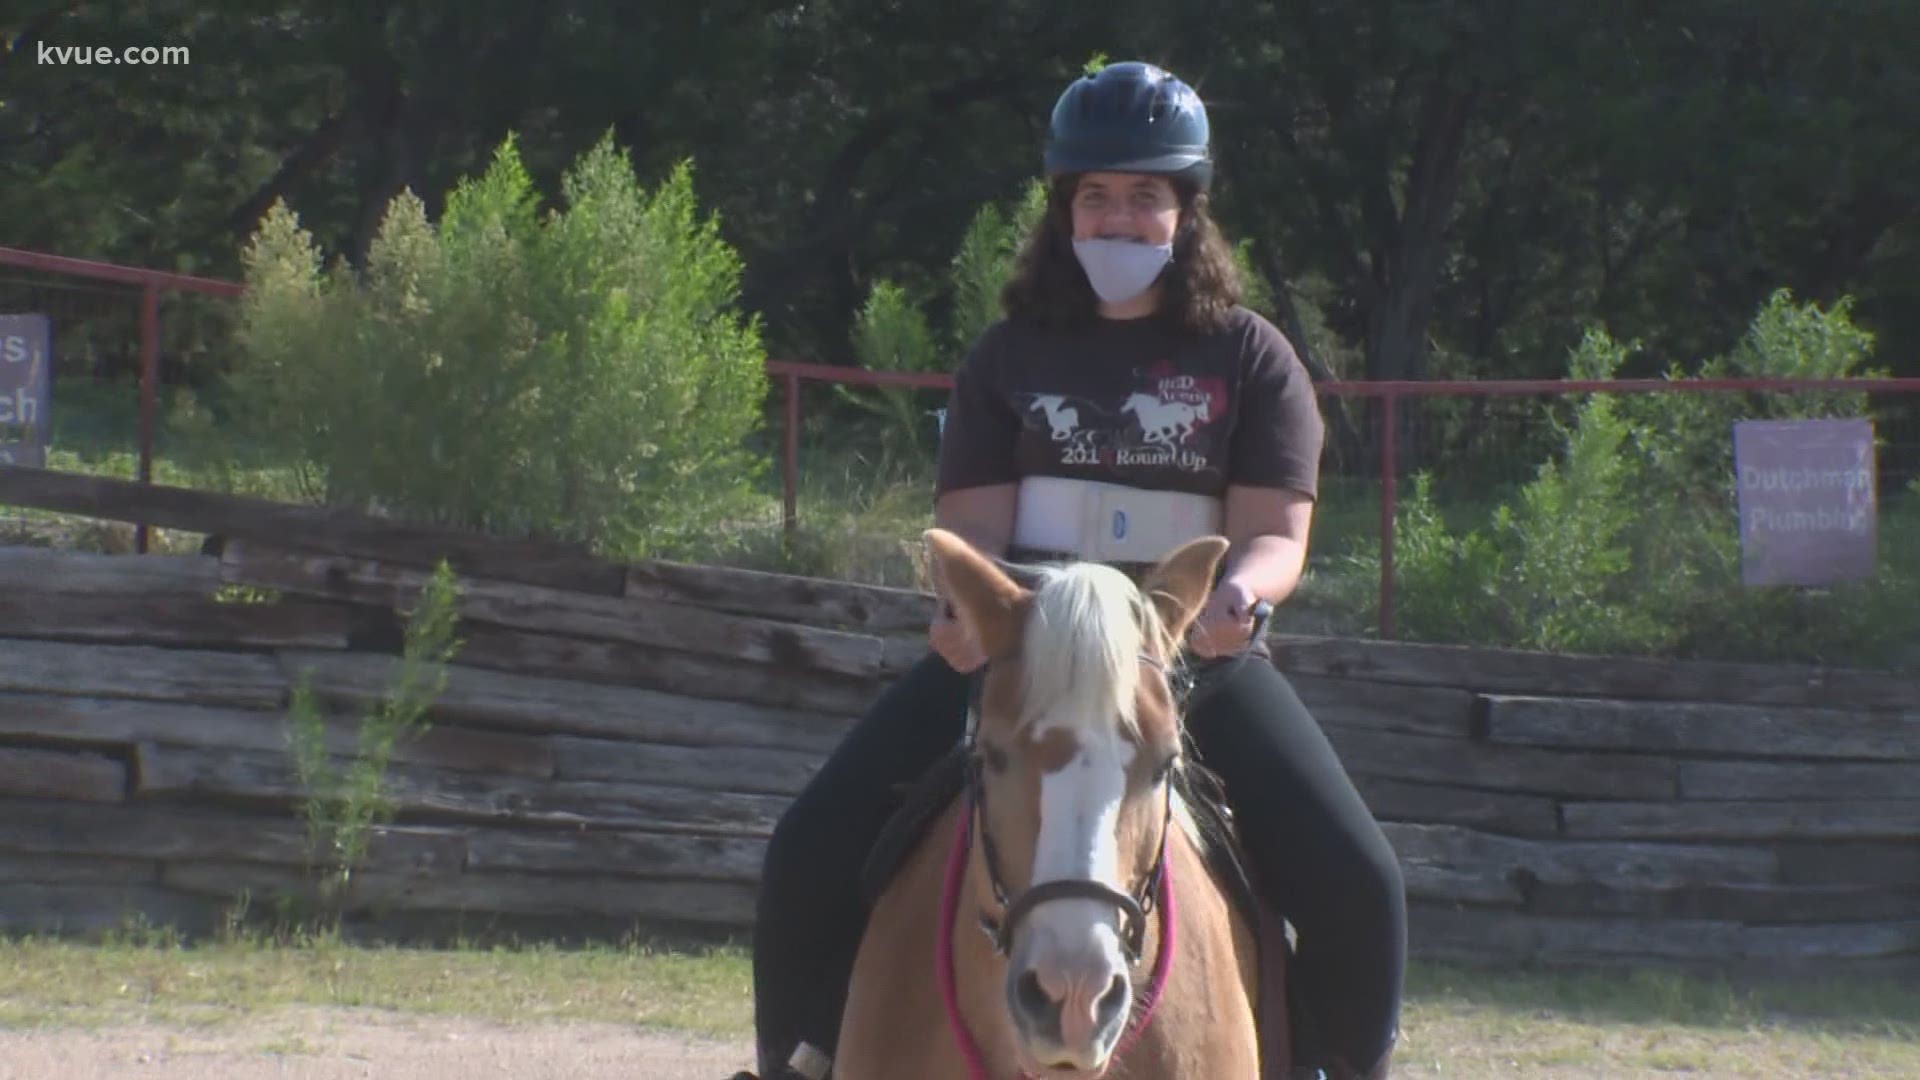 Doctors told Reagan Lowman's family she would never be able to walk. But equestrian sports helped her prove them wrong.